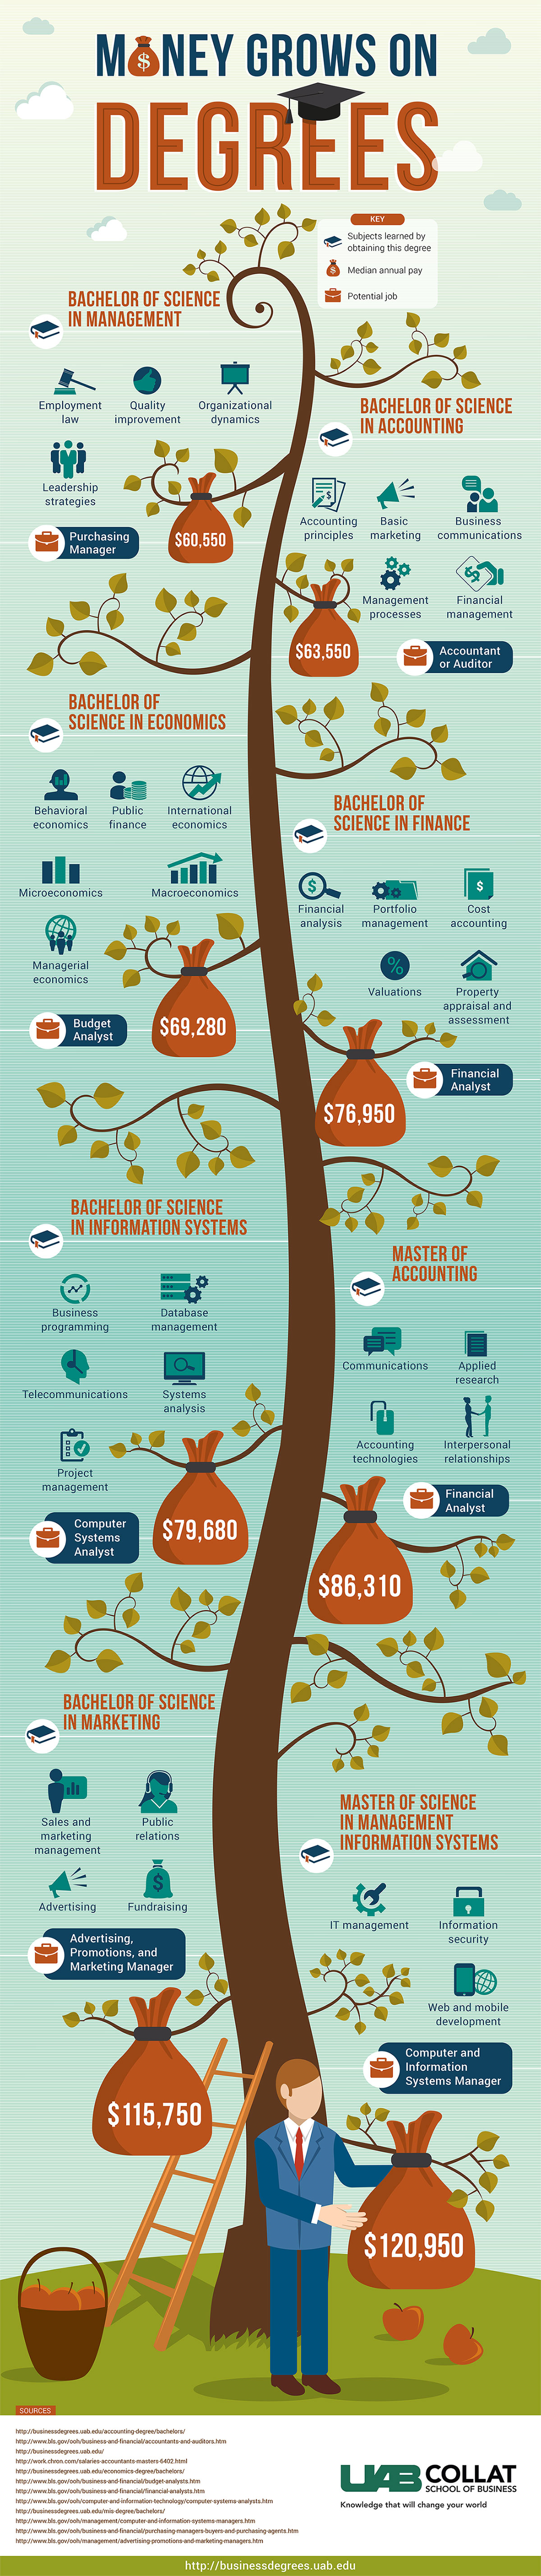 MONEY GROWS ON DEGREES | INFOGRAPHIC